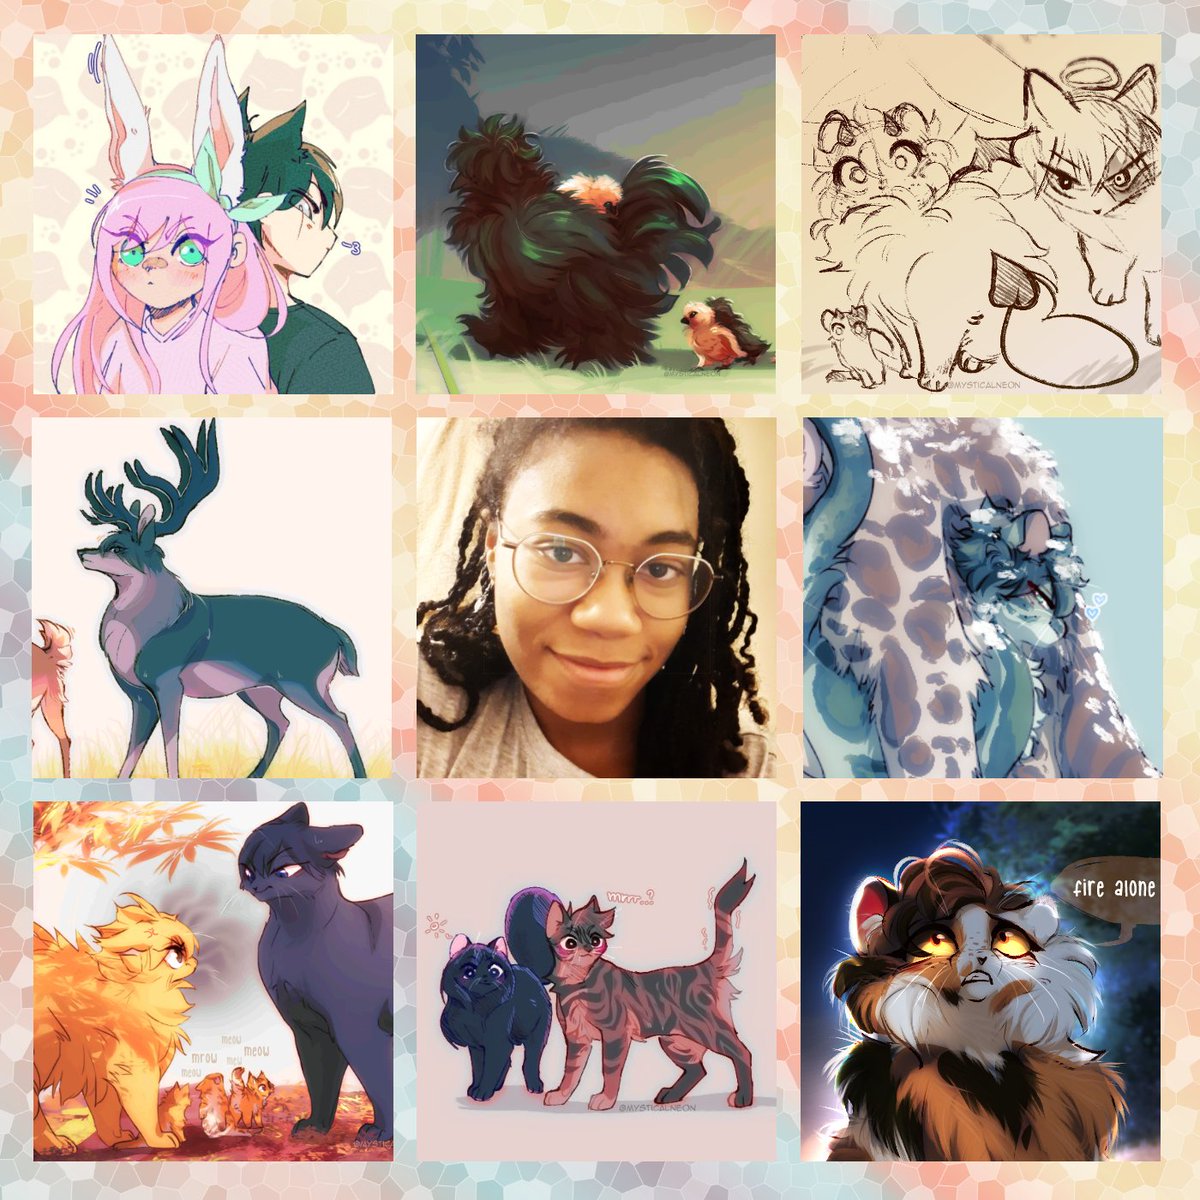 I haven't been able to do it last year, so I'm doing it now ^^
Also, I can blame uni for not having been able to draw much during the first half of this year so I don't have a lot of older art to show ;-;

#artvsartist2022 